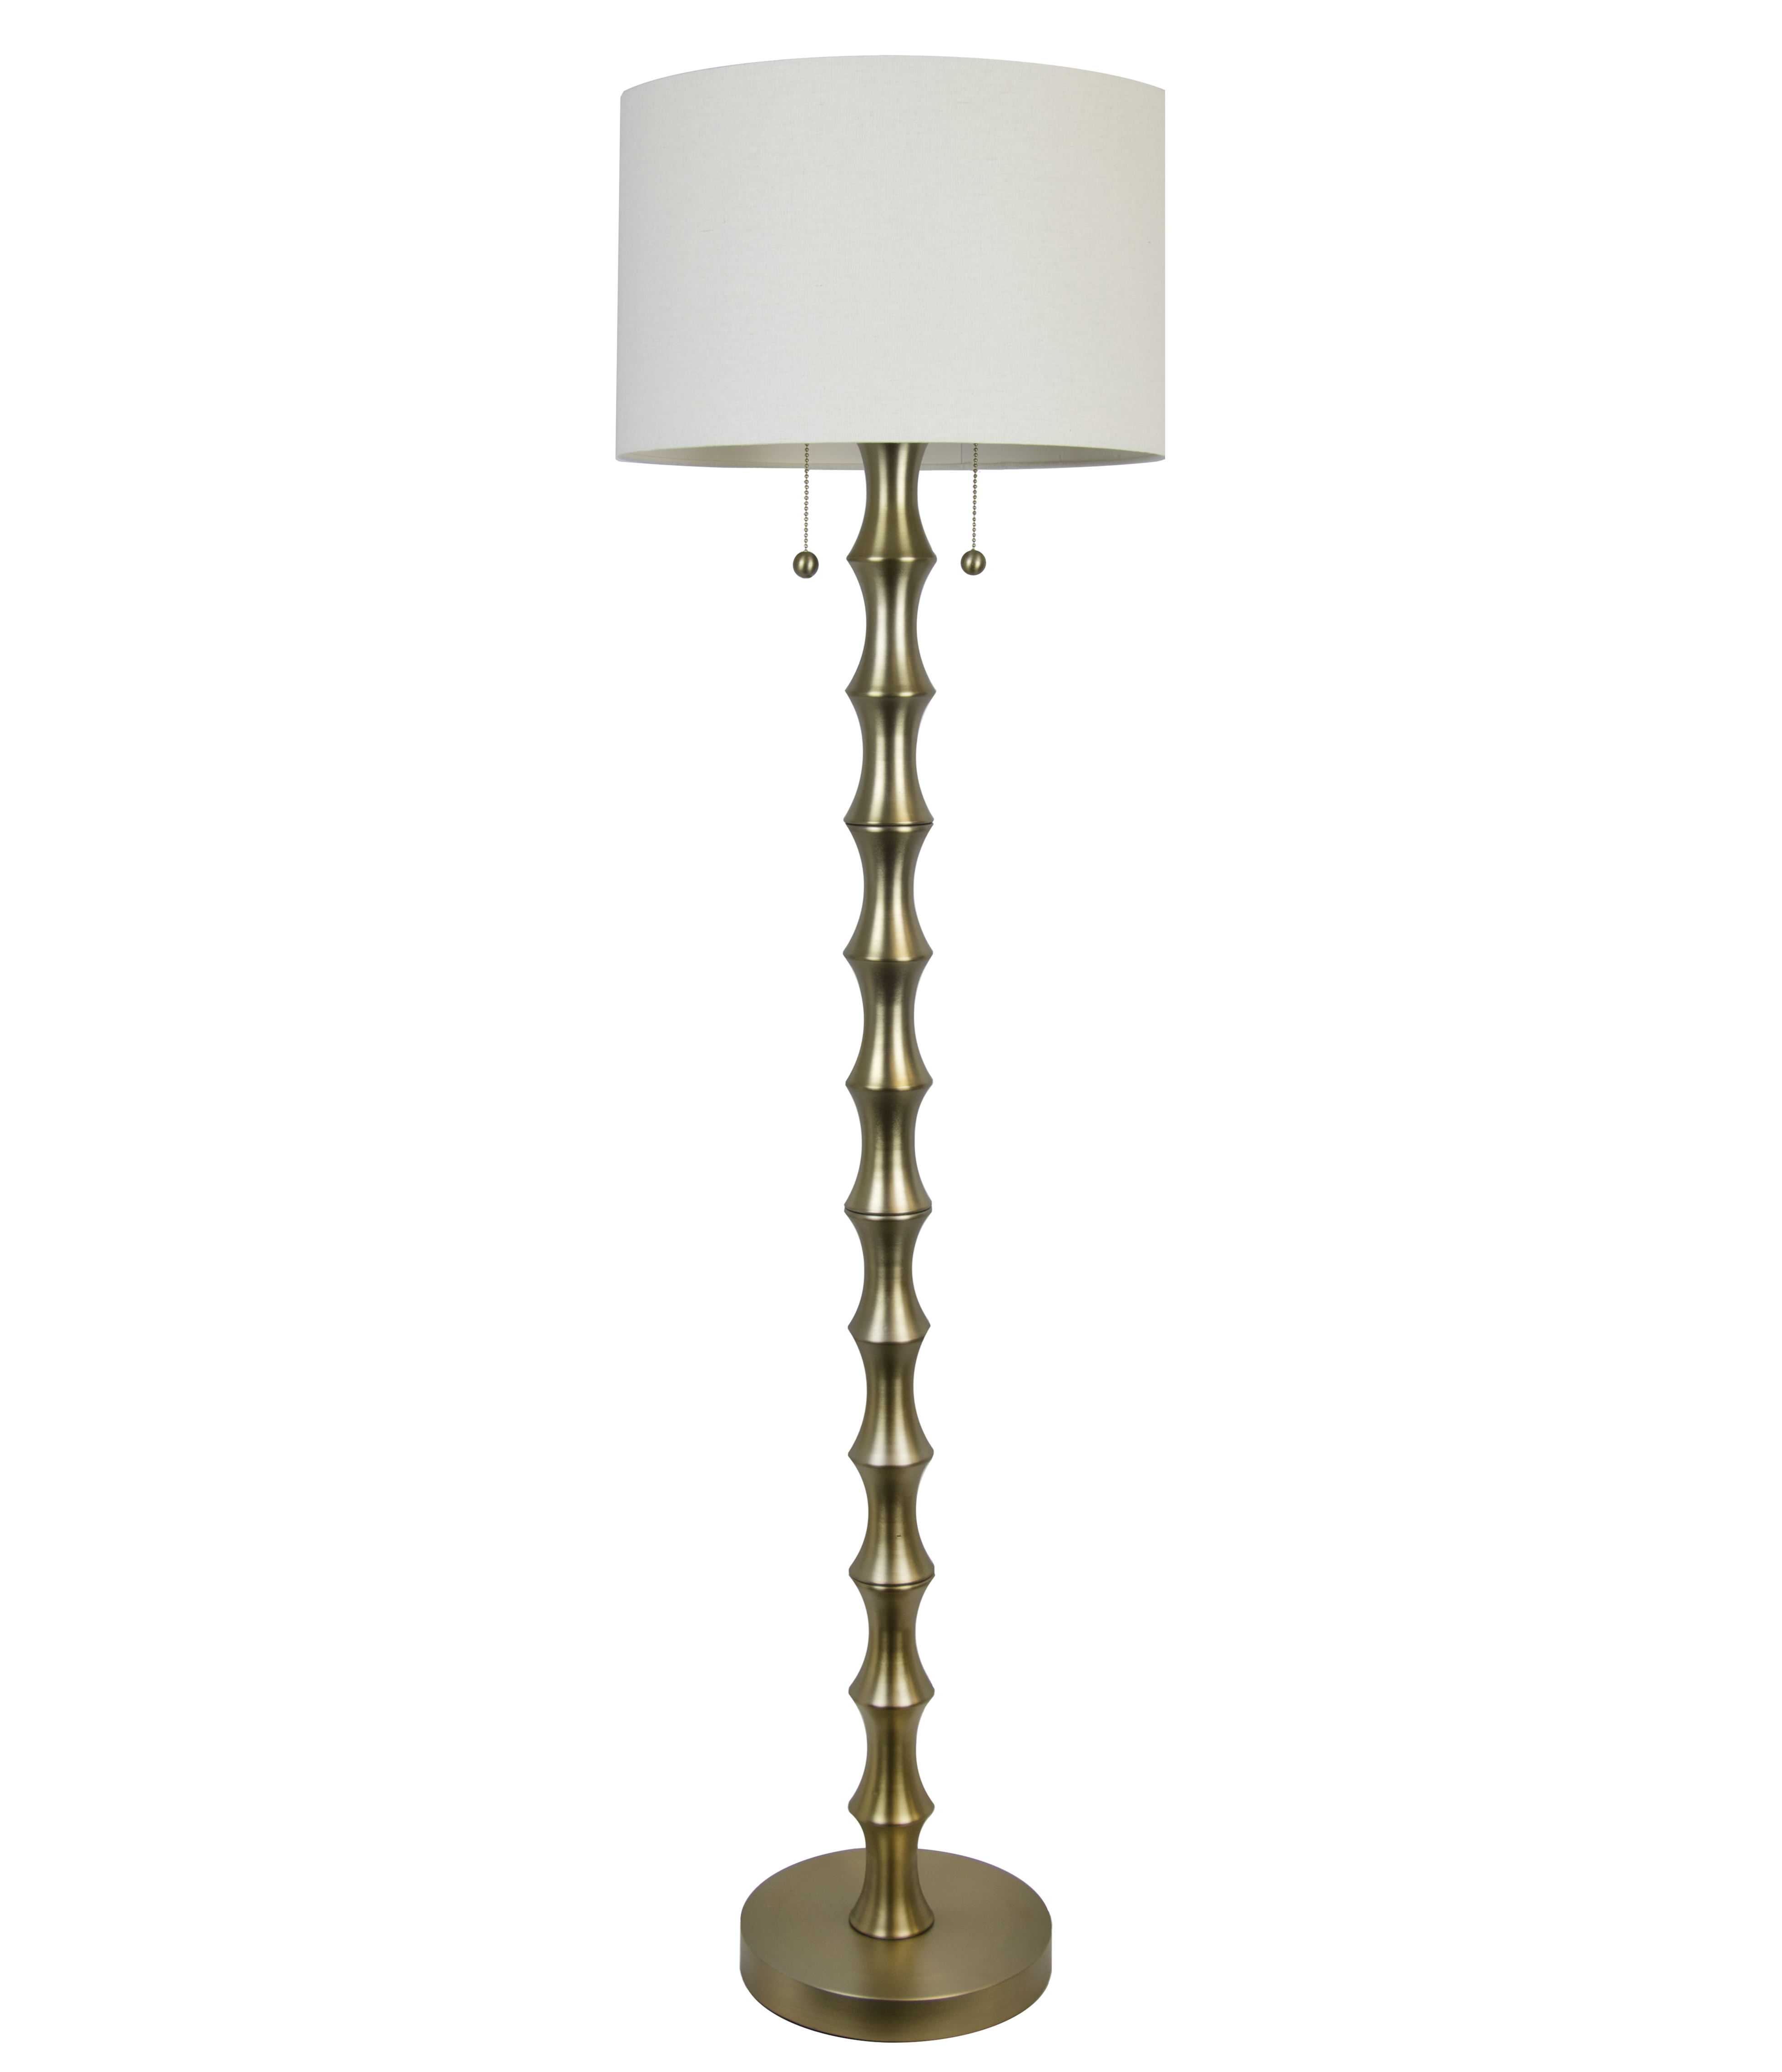 Details About 585 Plated Gold Bamboo Inspired Floor Lamp W Beige Fabric Drum Shade throughout sizing 3917 X 4554